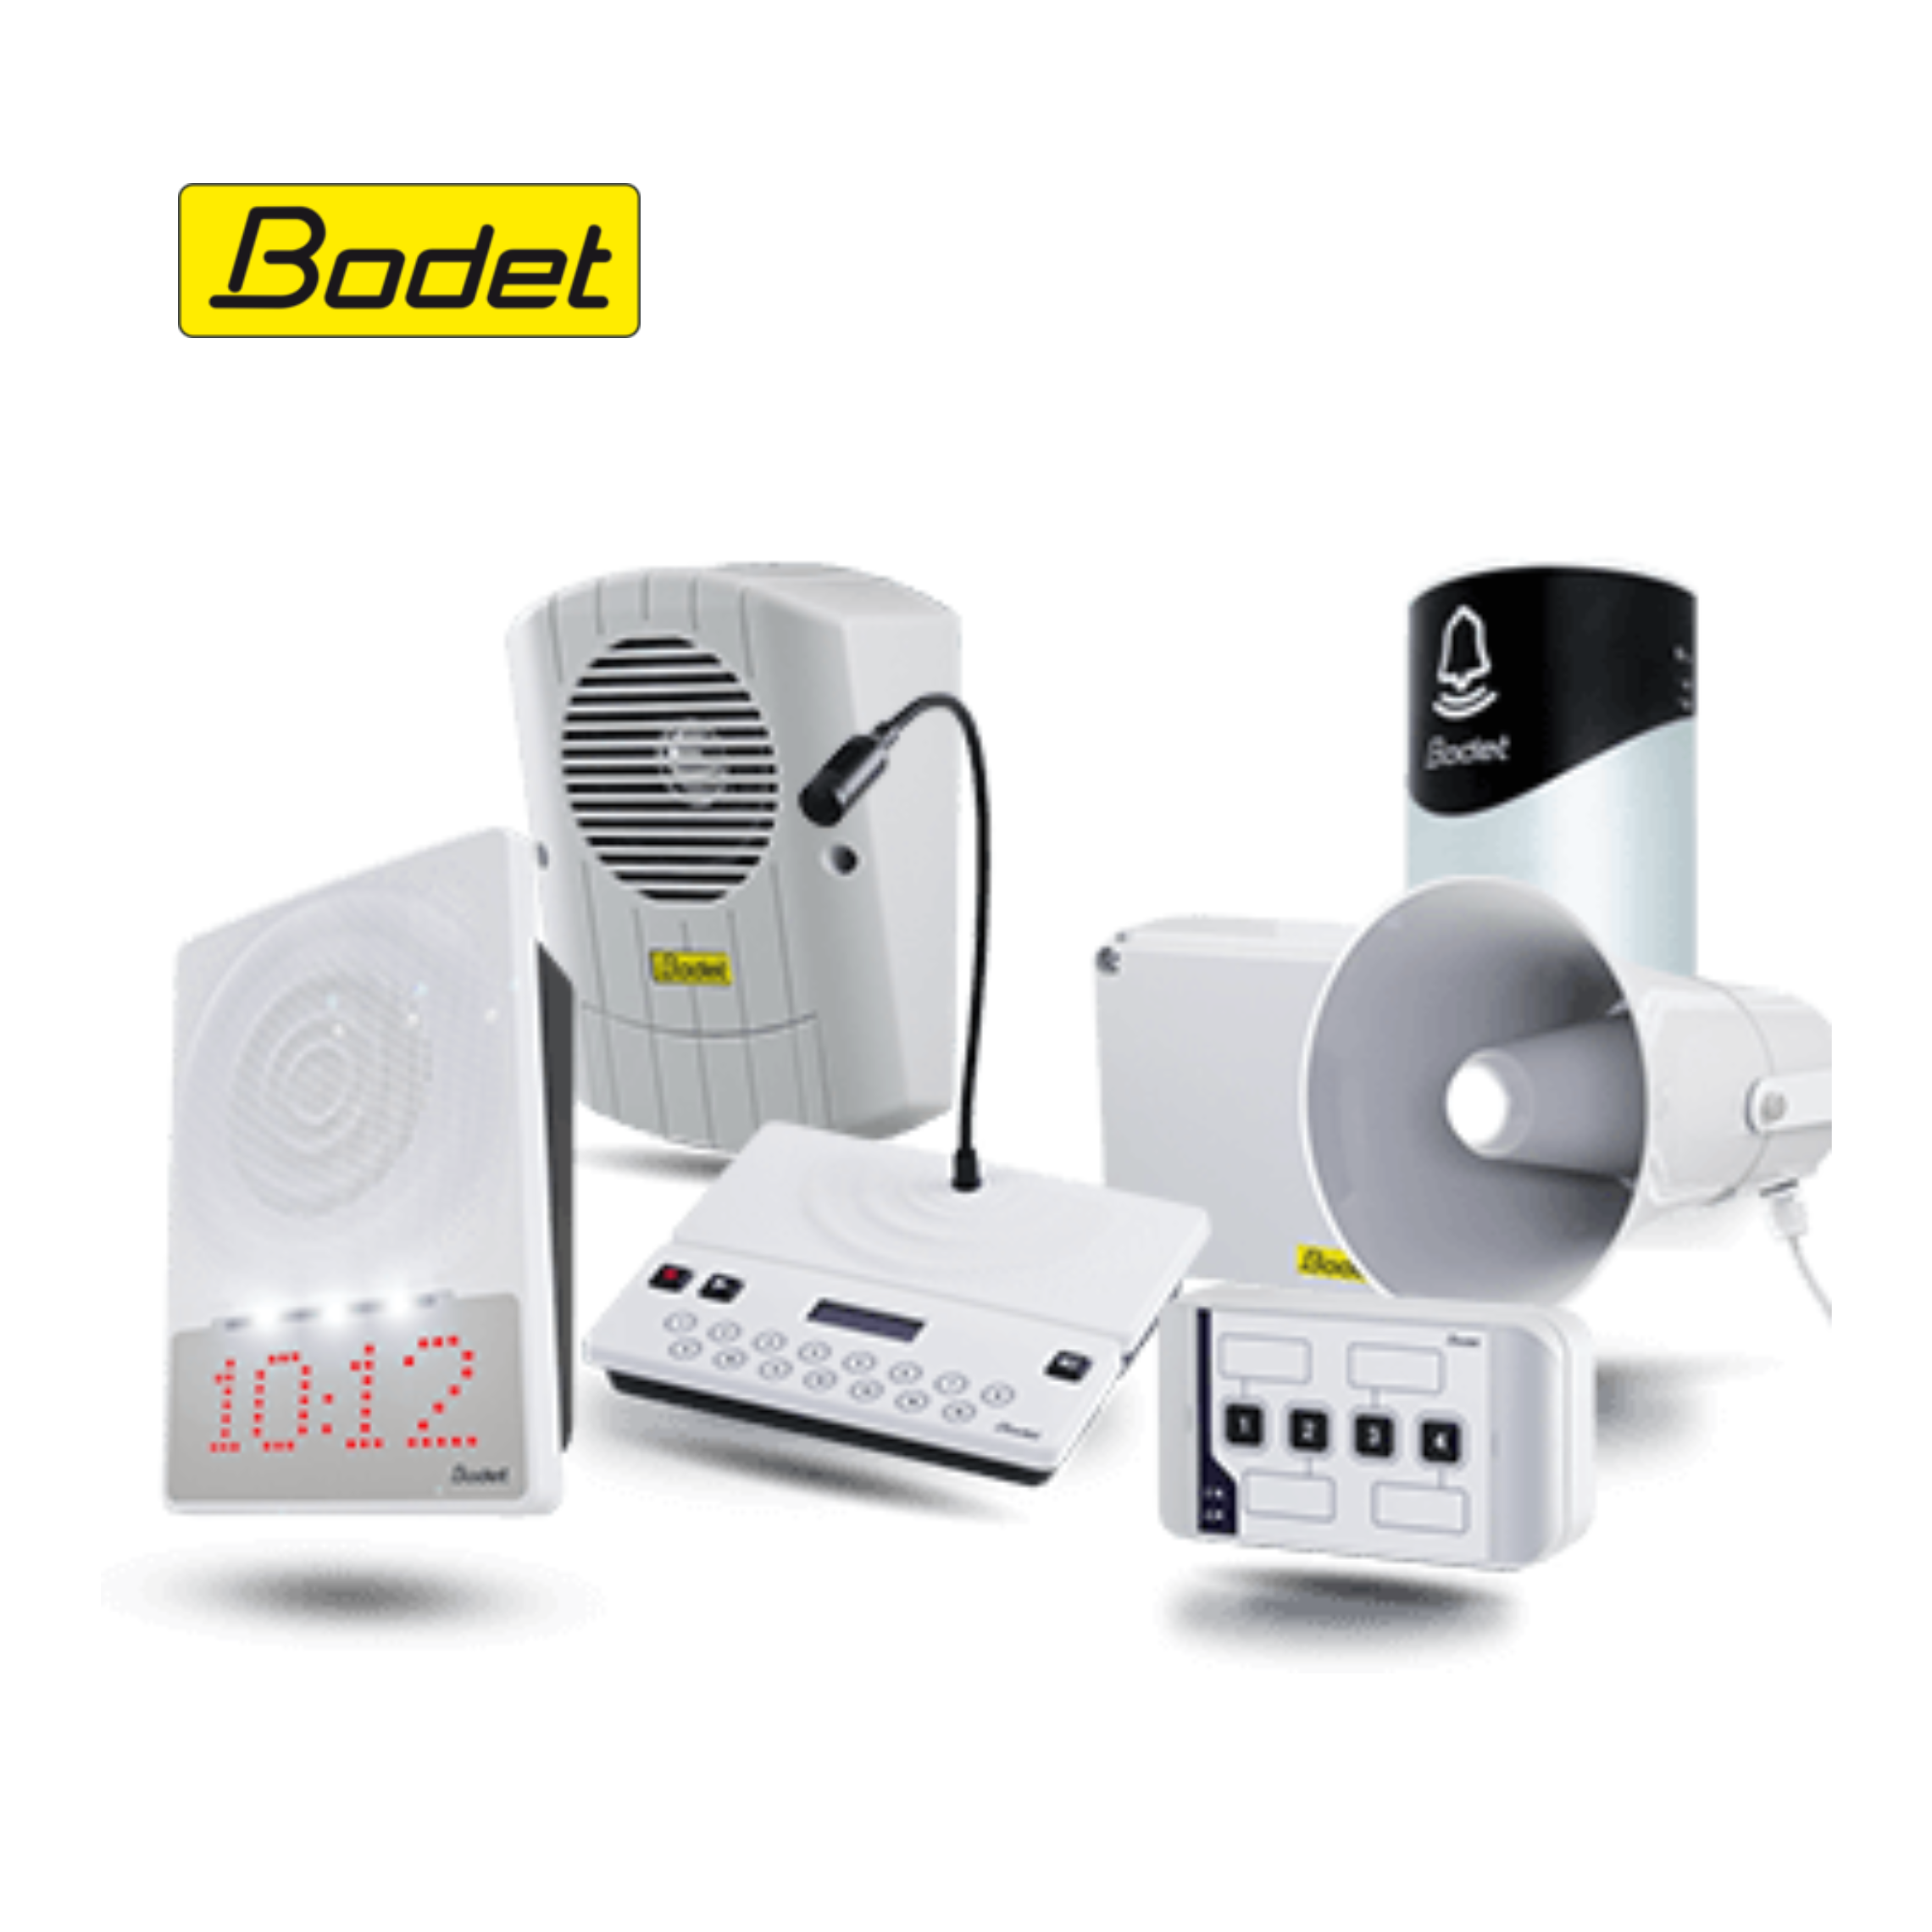 Introducing Bodet PA & Bell Class Change System for Schools